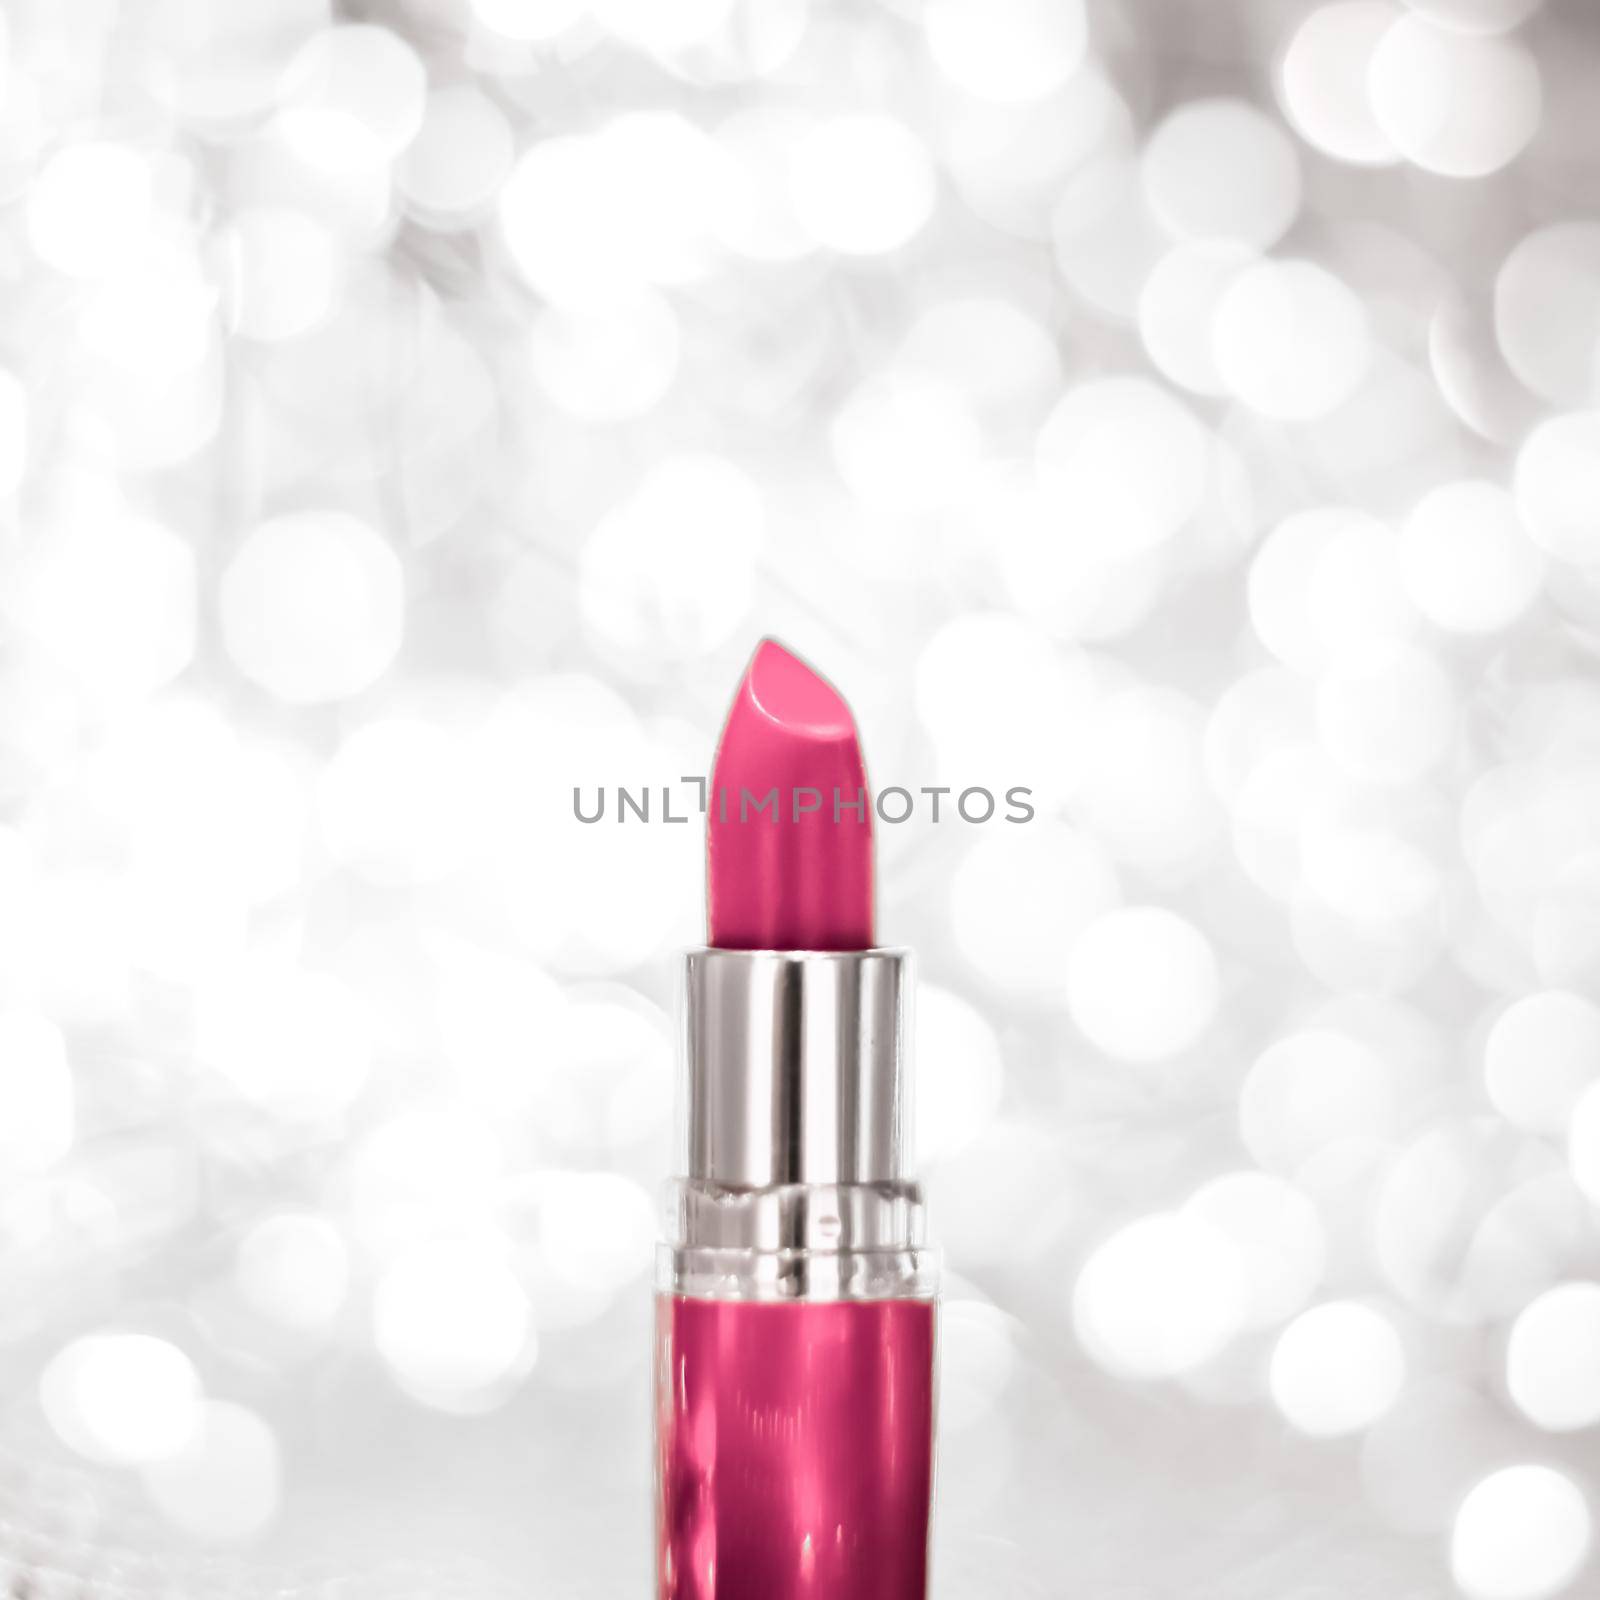 Pink lipstick on silver Christmas, New Years and Valentines Day holiday glitter background, make-up and cosmetics product for luxury beauty brand by Anneleven